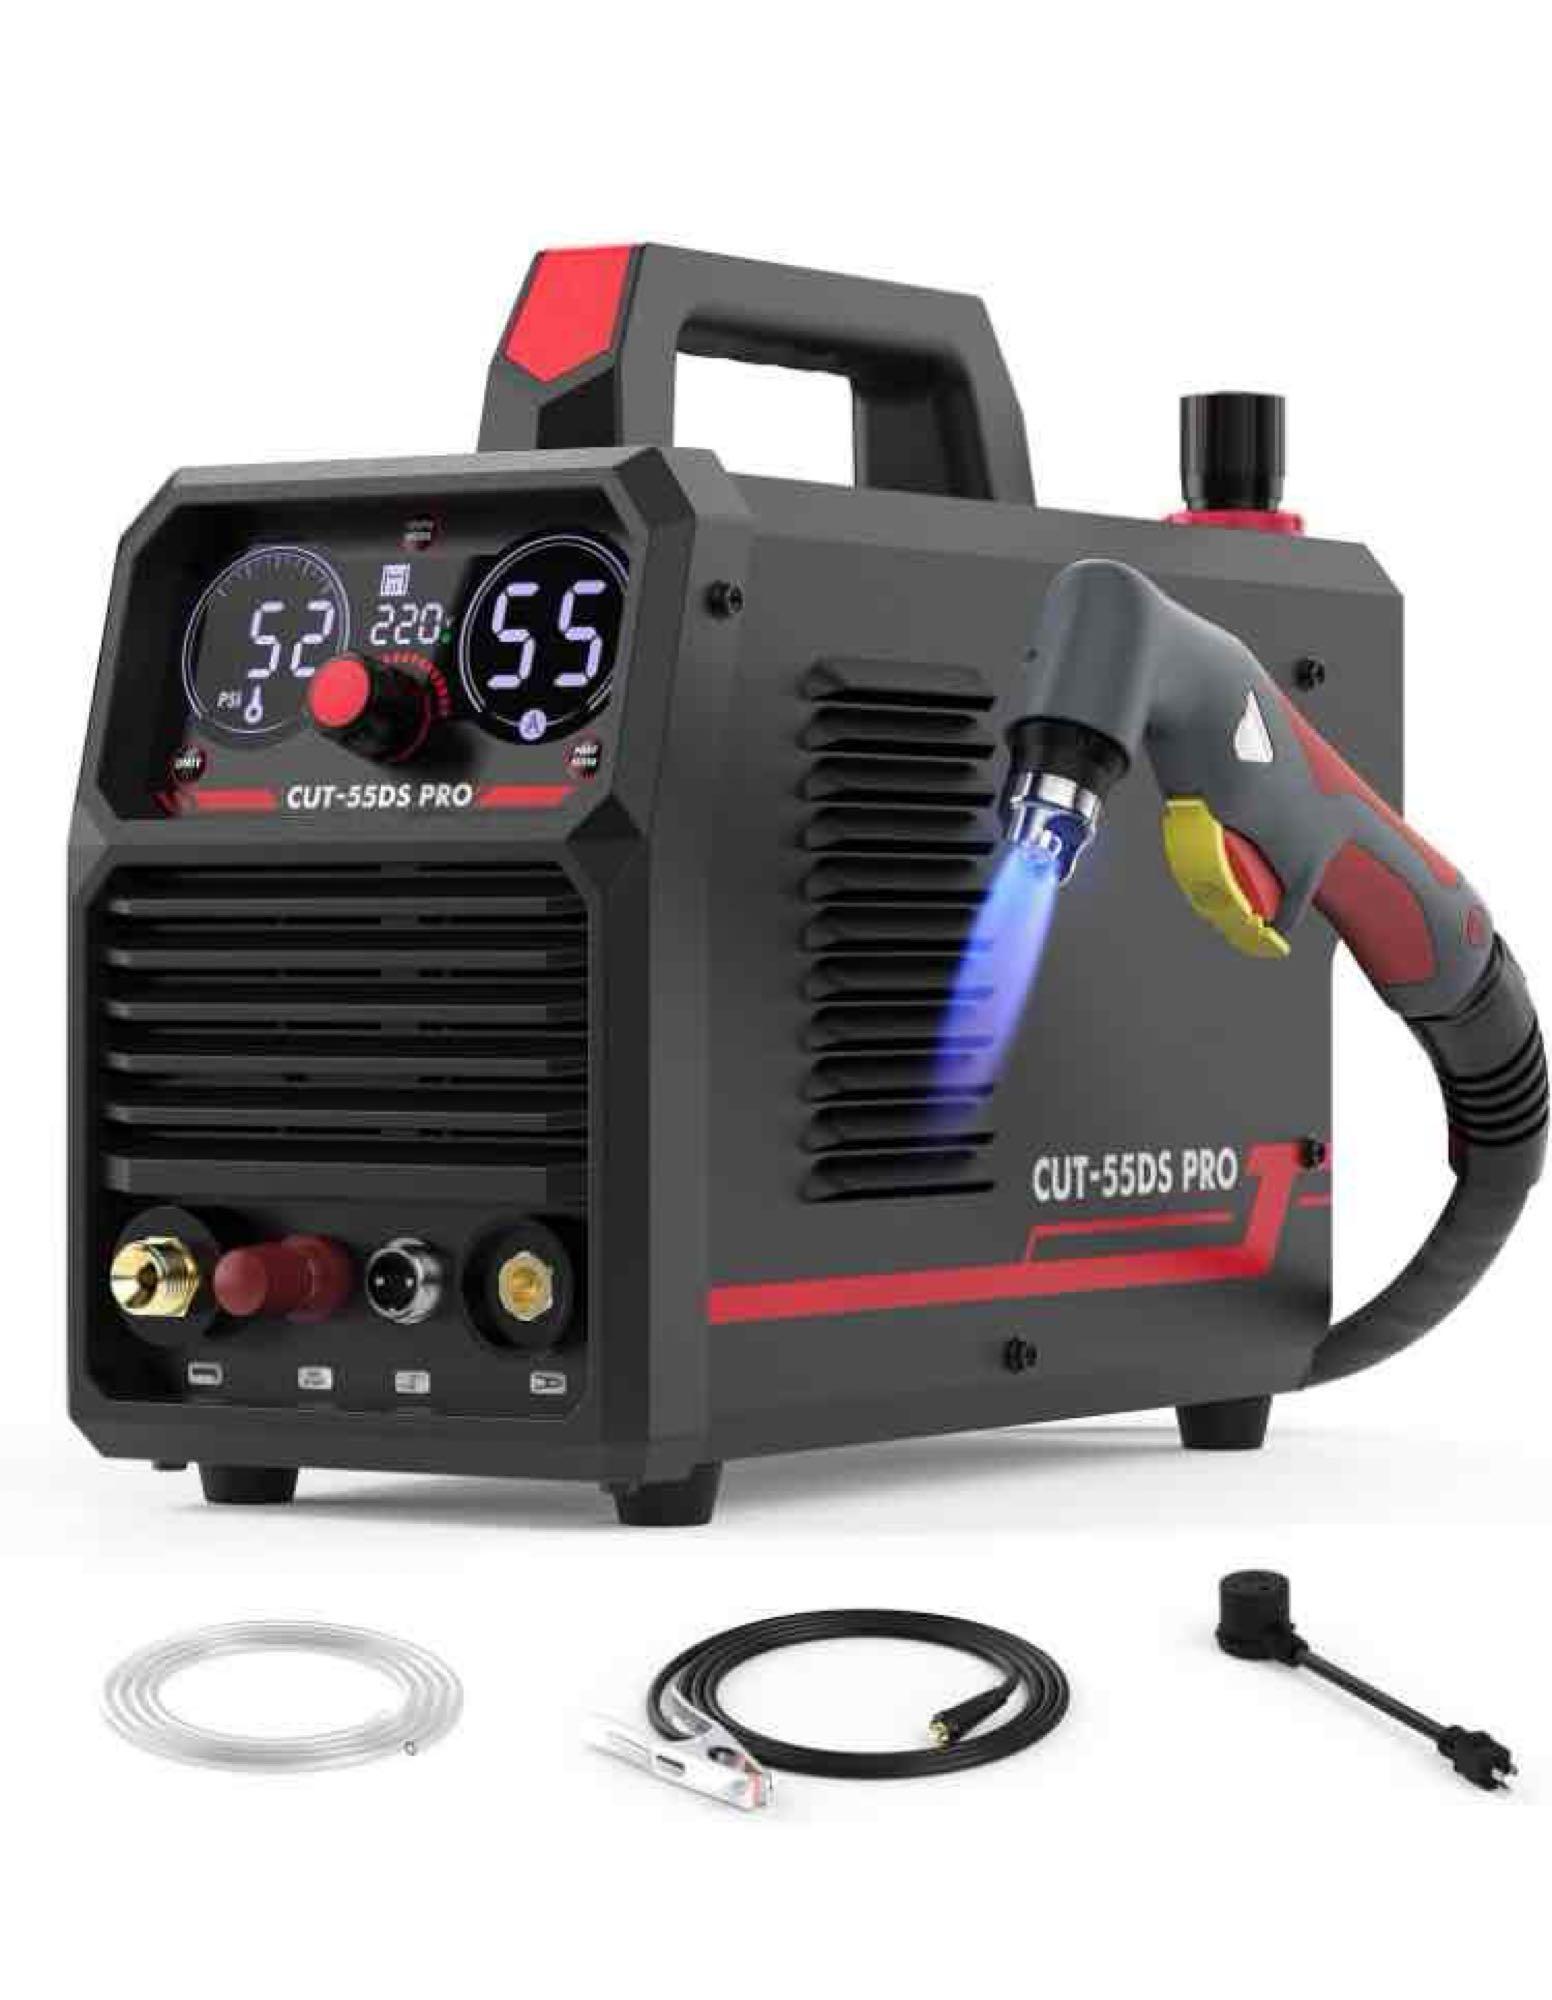 YESWELDER 55 Amp Plasma Cutter Non-High Frequency, Screen Display Non-Touch Pilot Arc, Digital DC